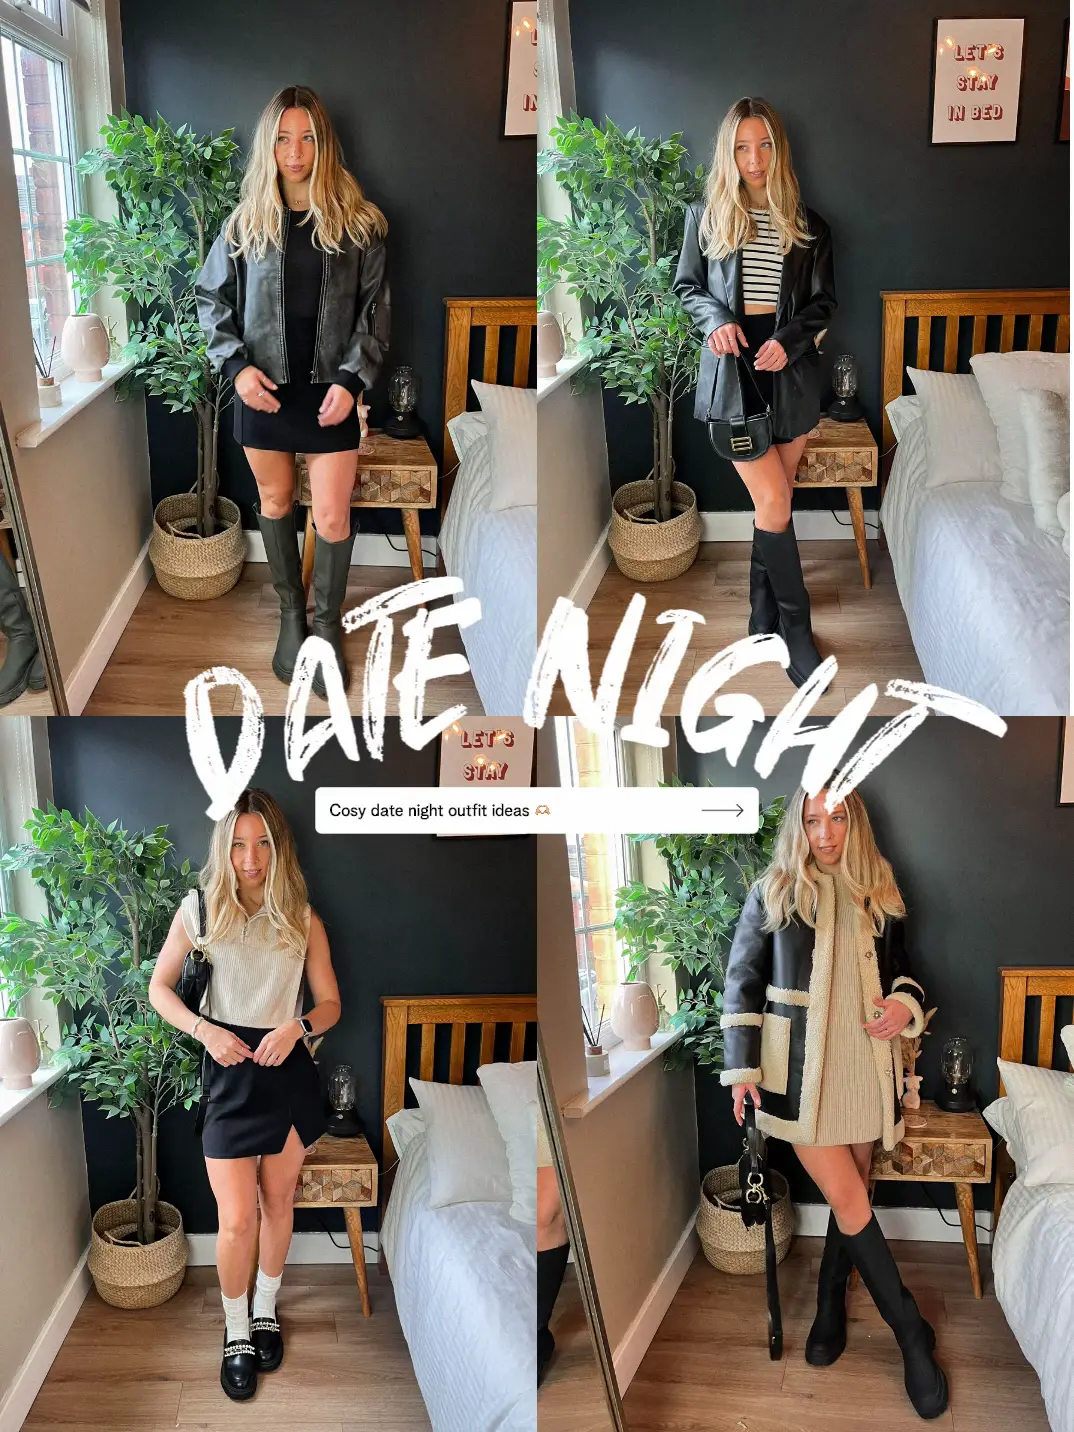 20 Girls Night Out Outfit Ideas - Pretty Designs  Girls night out outfits, Night  out outfit, Girls night out